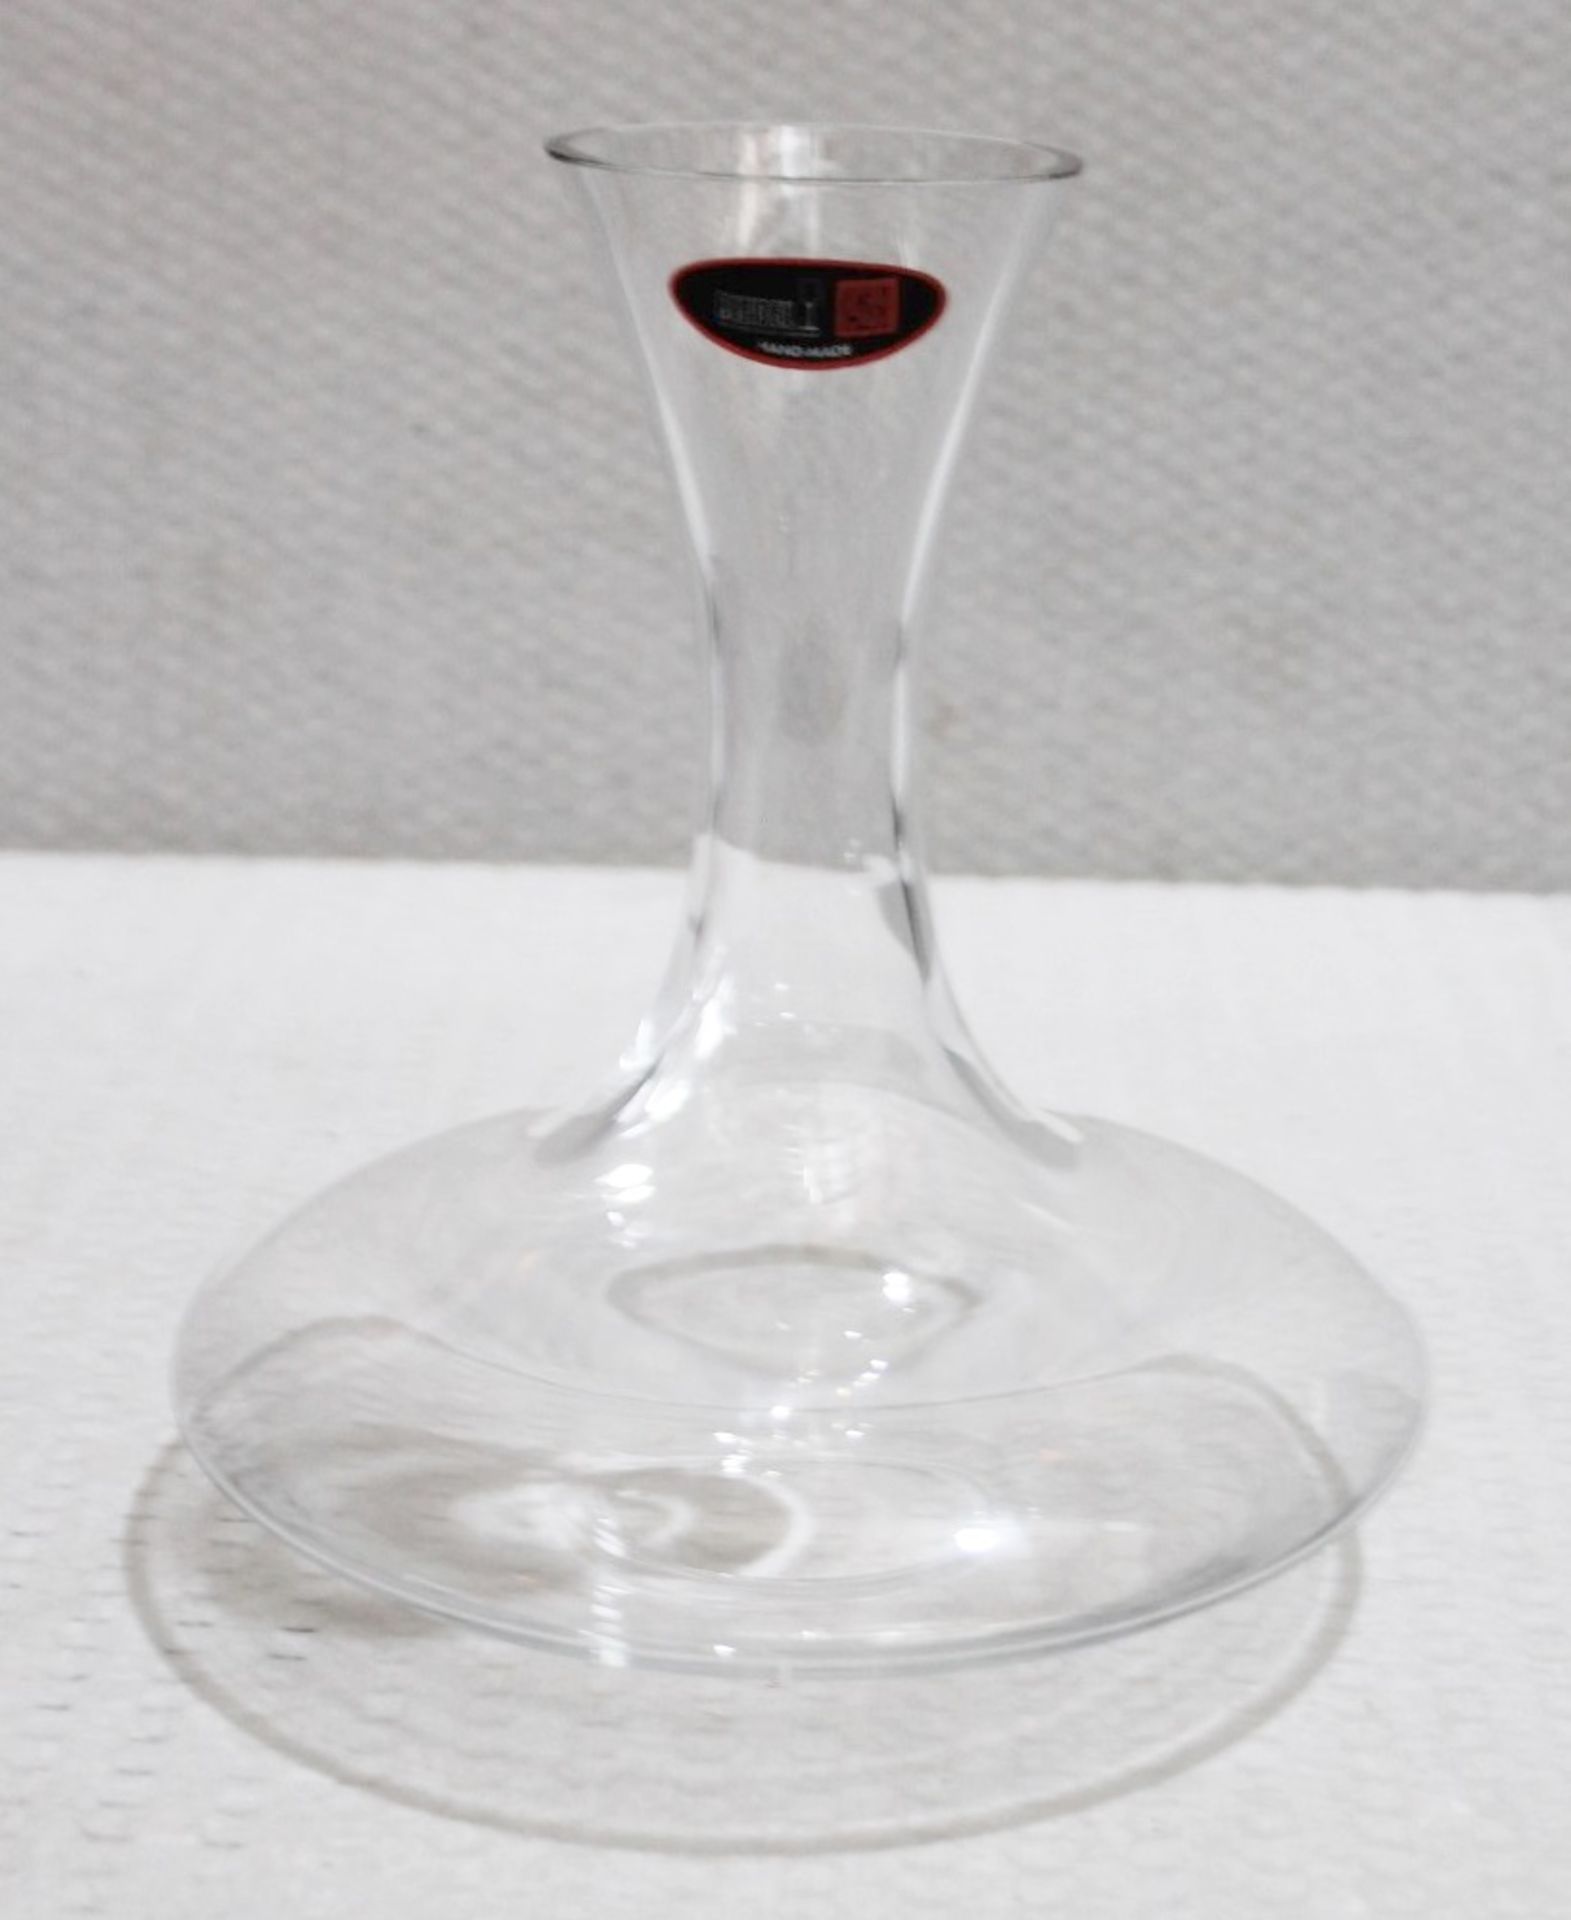 1 x RIEDEL 'Ultra Magnum' Mouth-blown Crystal Glass Carafe Decanter (2L) - Original Price £175.00 - Image 3 of 7